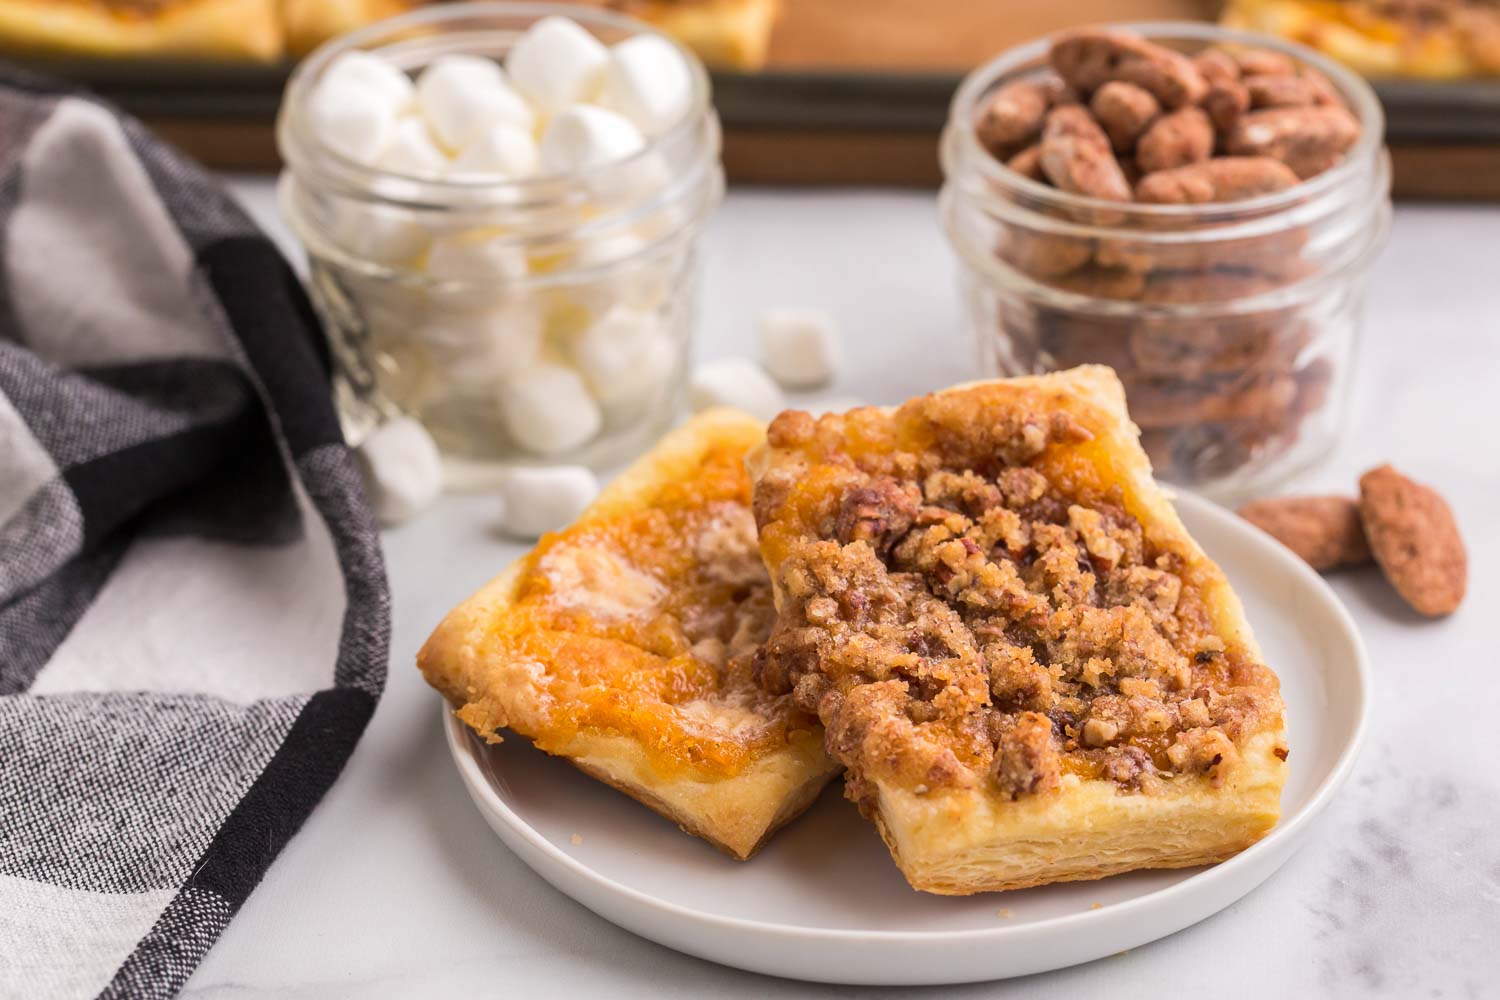 Two pieces of decadent pastry on a white plate with two glass jars filled with pecans and marshmallows.